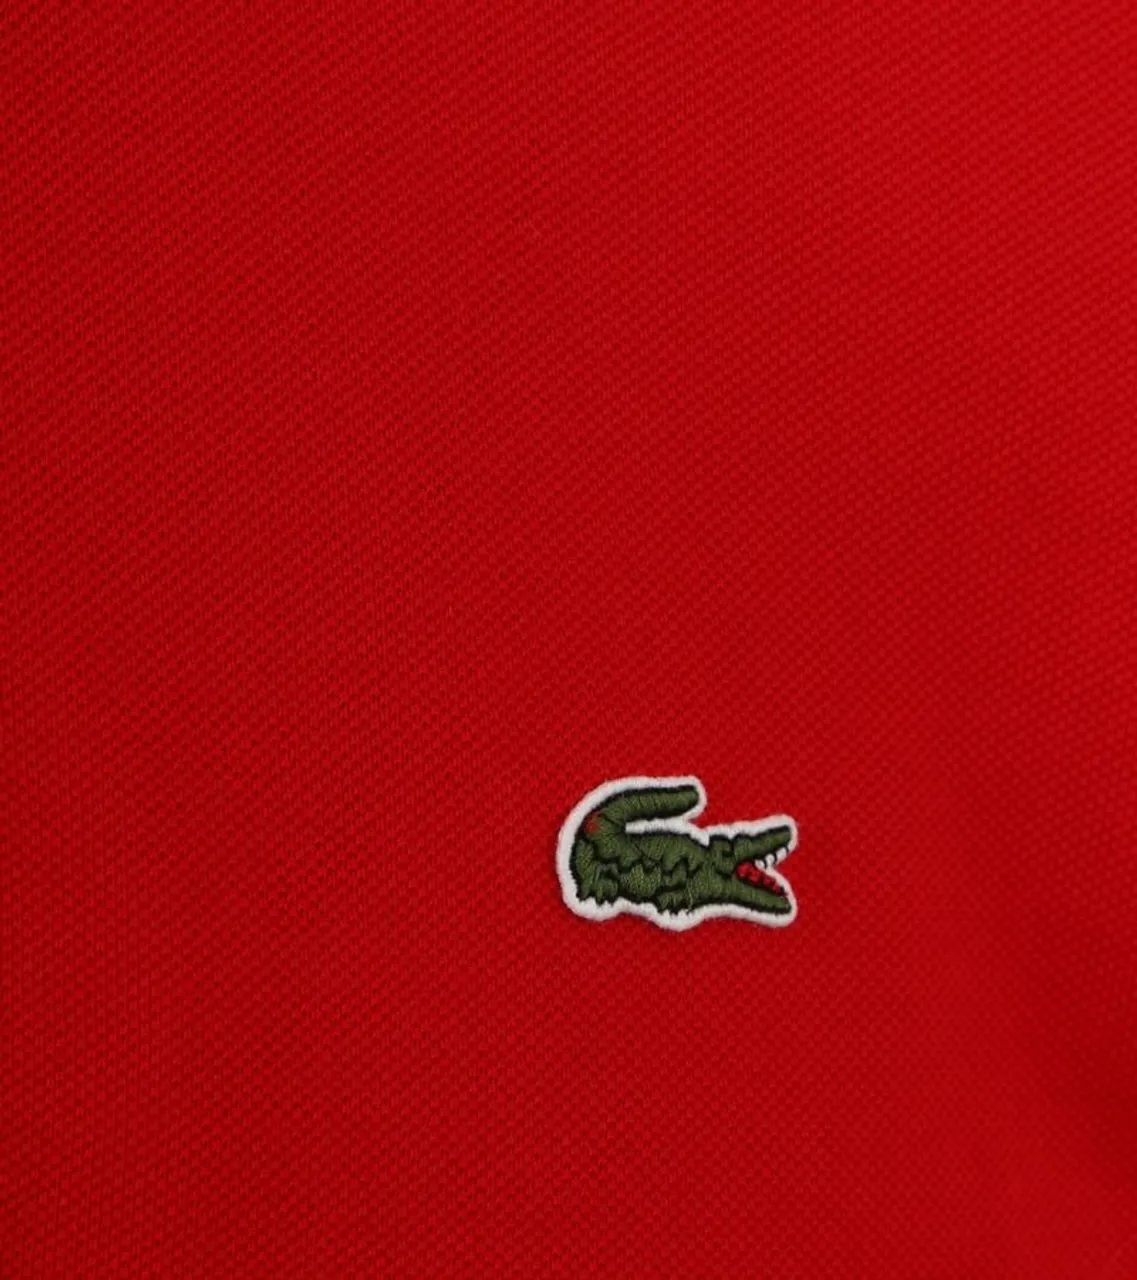 Lacoste Poloshirt Pique Rood